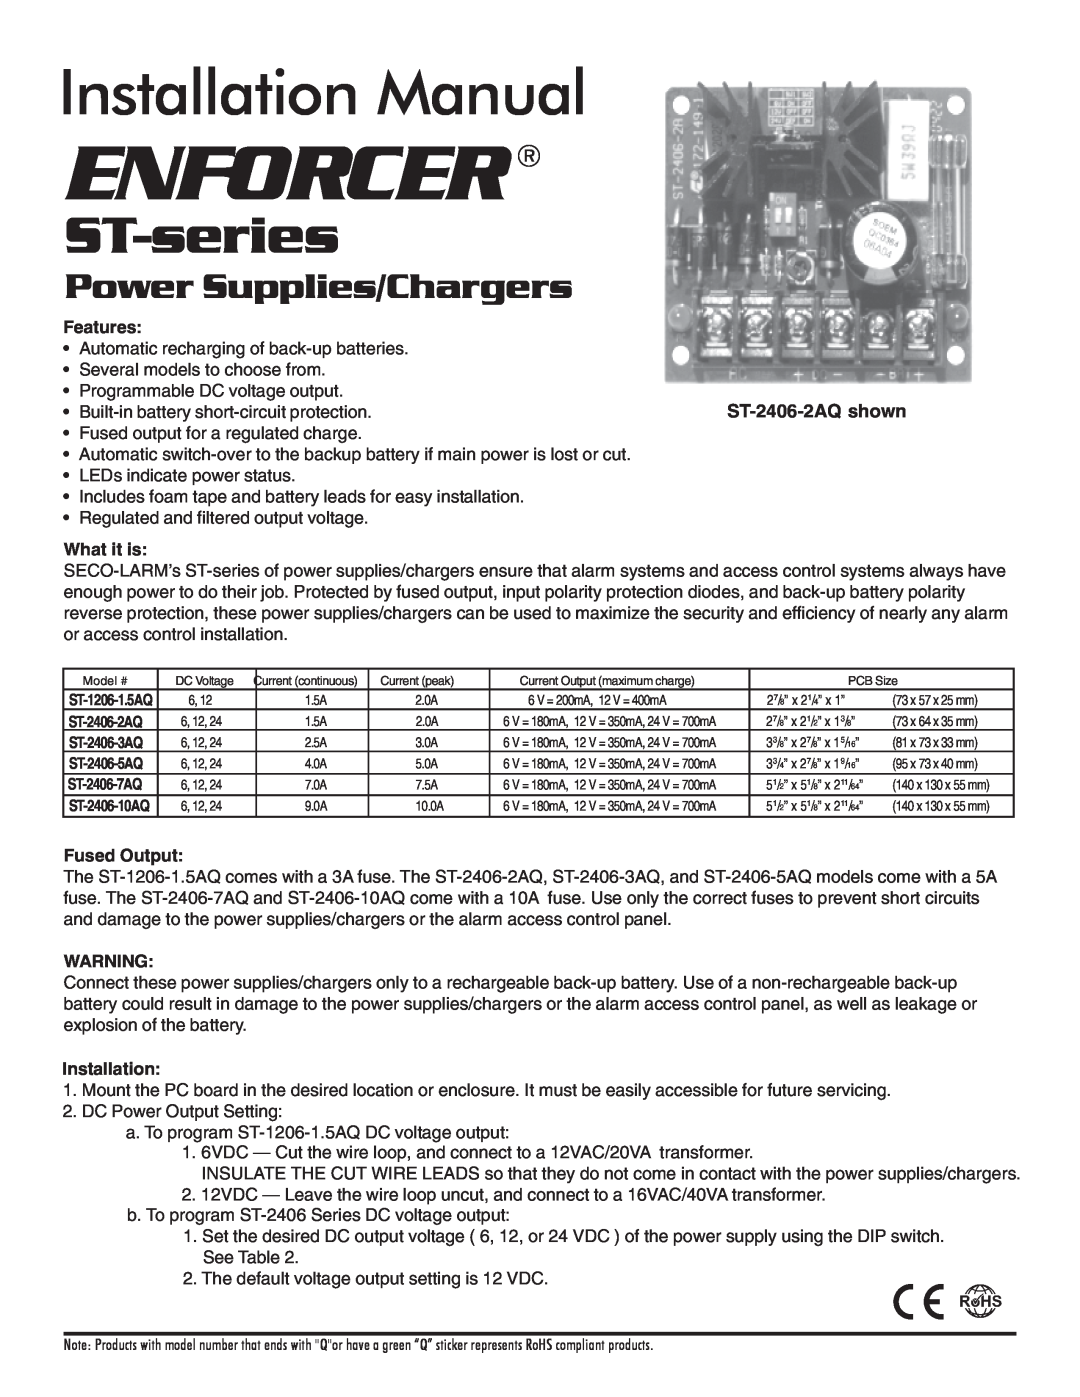 SECO-LARM USA ST-2406-5AQ installation manual Features, ST-2406-2AQ shown, What it is, Fused Output, Installation 